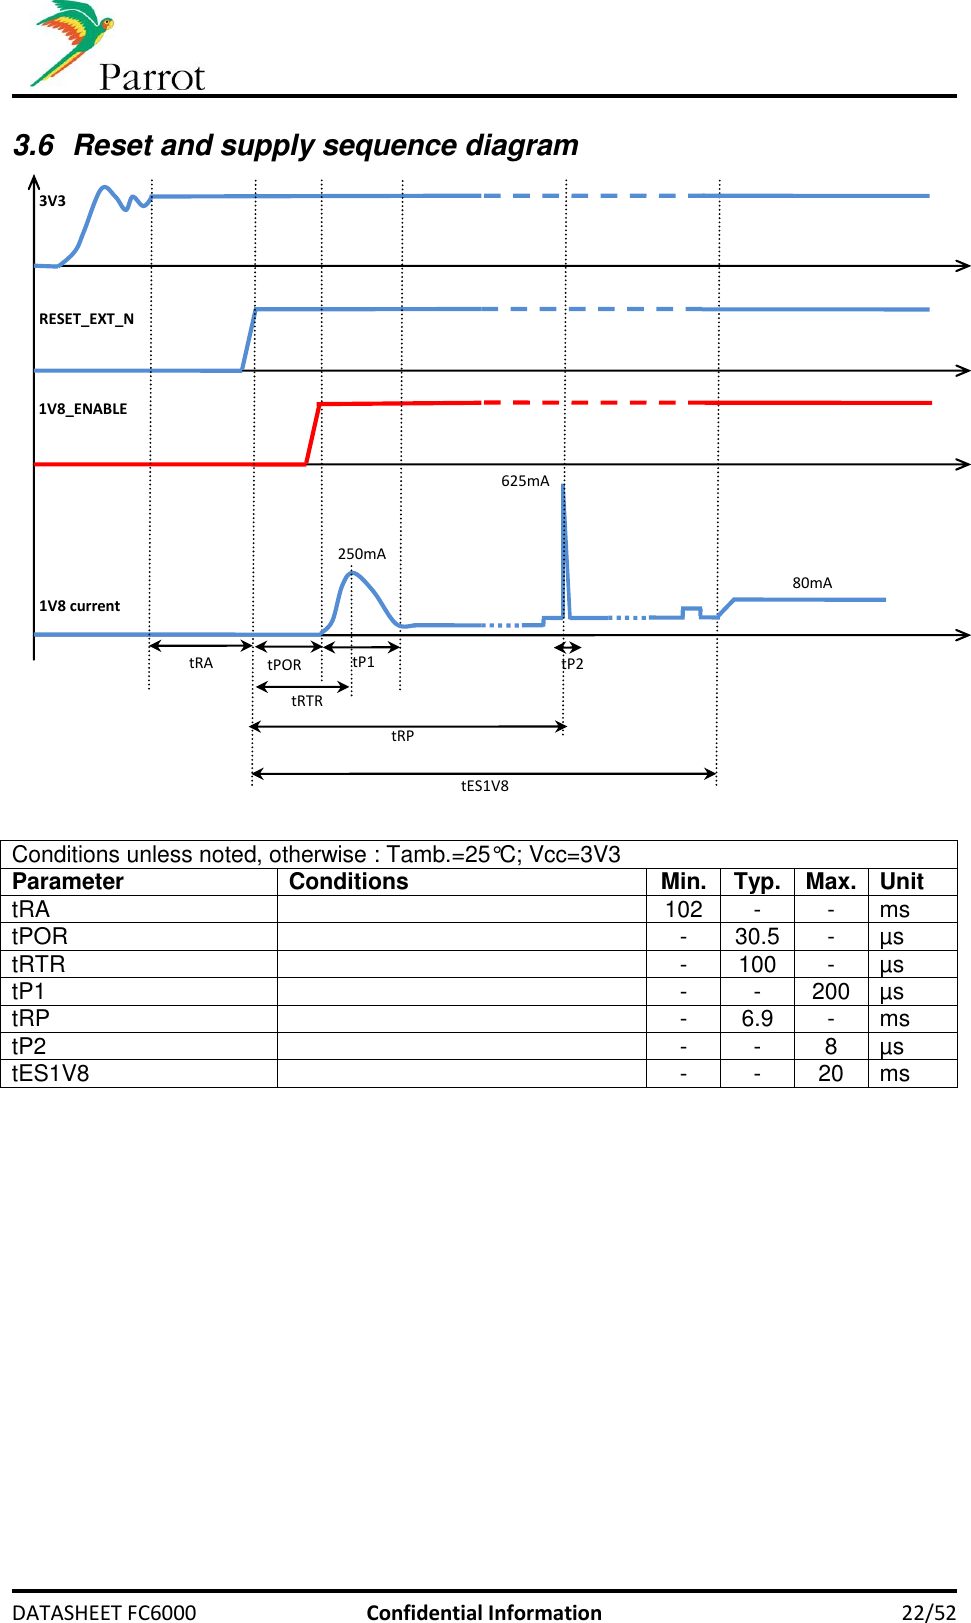     DATASHEET FC6000  Confidential Information 22/52 3.6  Reset and supply sequence diagram     Conditions unless noted, otherwise : Tamb.=25°C; Vcc=3V3 Parameter Conditions Min. Typ. Max. Unit tRA  102 - - ms tPOR  - 30.5 - µs tRTR  - 100 - µs tP1  - - 200 µs tRP  - 6.9 - ms tP2  - - 8 µs tES1V8  - - 20 ms  3V3 RESET_EXT_N 1V8_ENABLE tRTR 1V8 current tPOR tRA tRP tP2 80mA 625mA 250mA tES1V8 tP1 